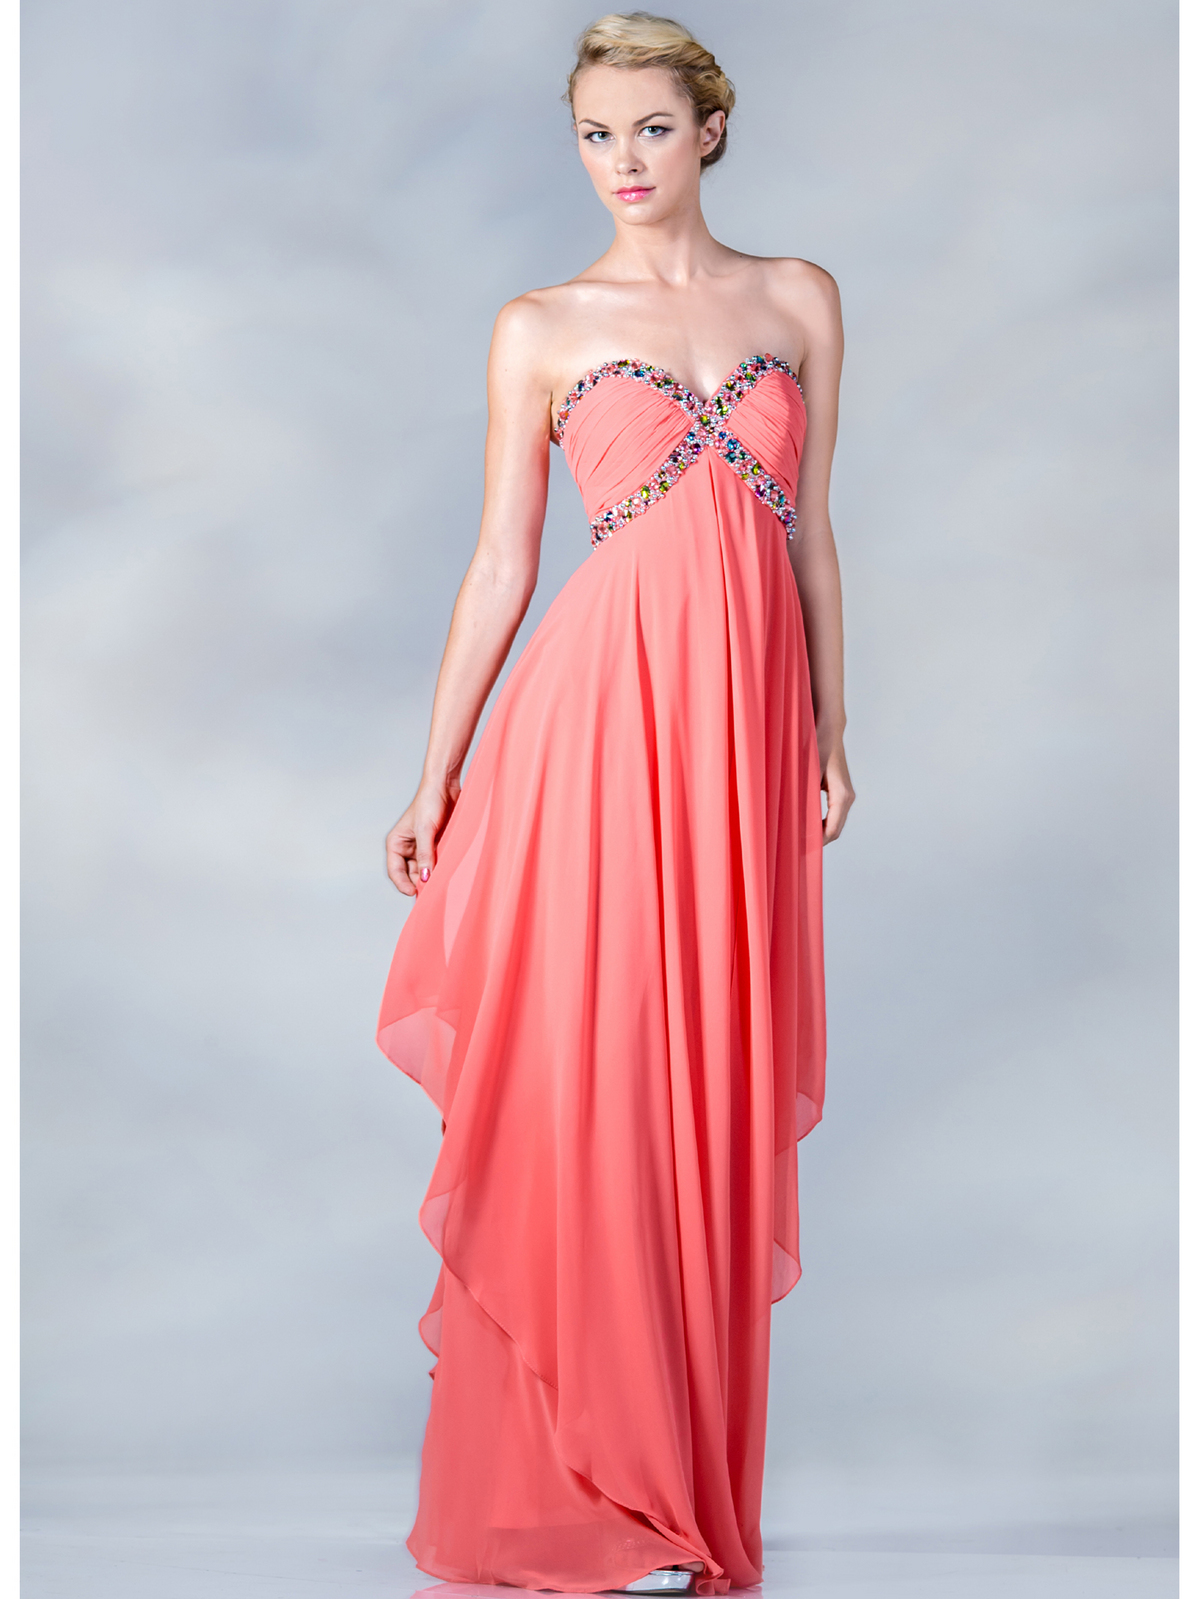 Short Coral Prom Dress